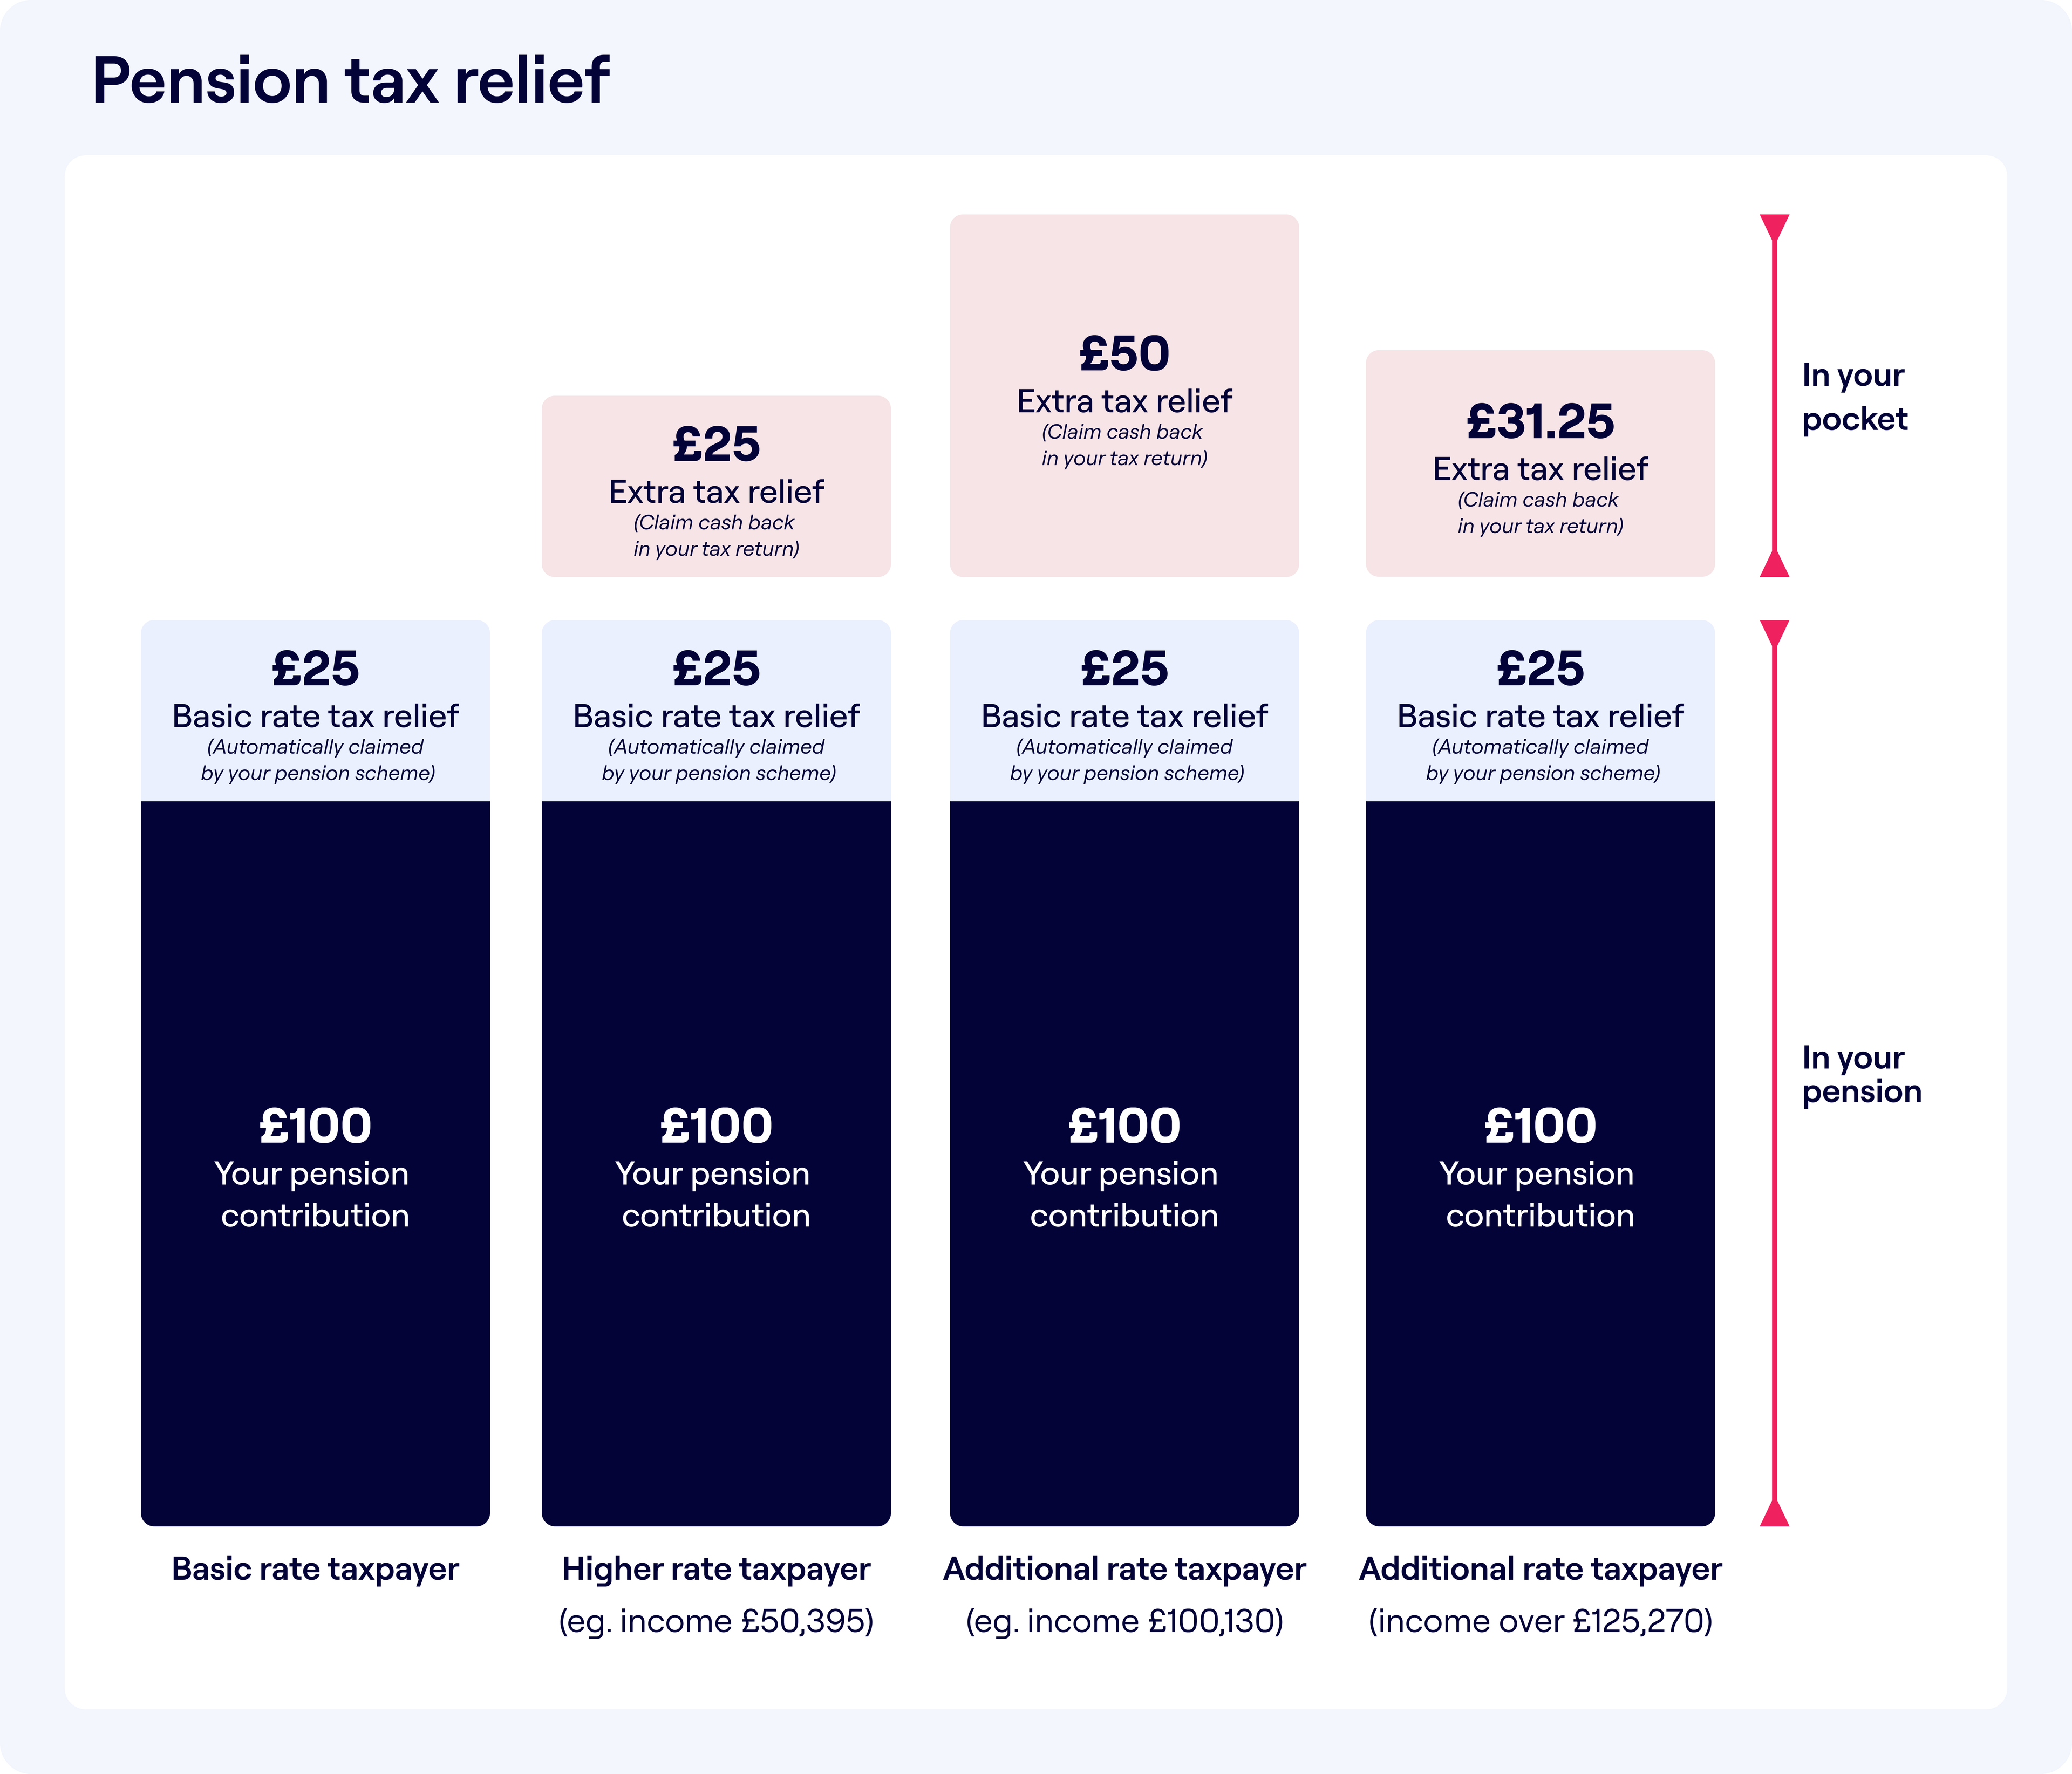 An infographic showing tax relief for different types of taxpayers in the UK. Three columns represent the 'Basic rate taxpayer', 'Higher rate taxpayer (£50K - £150K)', and 'Additional rate taxpayer (£150K+)'. Each column shows a £100 pension contribution at the bottom with varying tax relief amounts above: £25 for Basic rate (claimed automatically), £25 for Higher rate (claimed by completing a form to HMRC), and £31.25 for Additional rate (also claimed by form). Arrows indicate that for Basic rate, the relief goes into the pension, and for Higher and Additional rates, it goes 'In your pocket'.